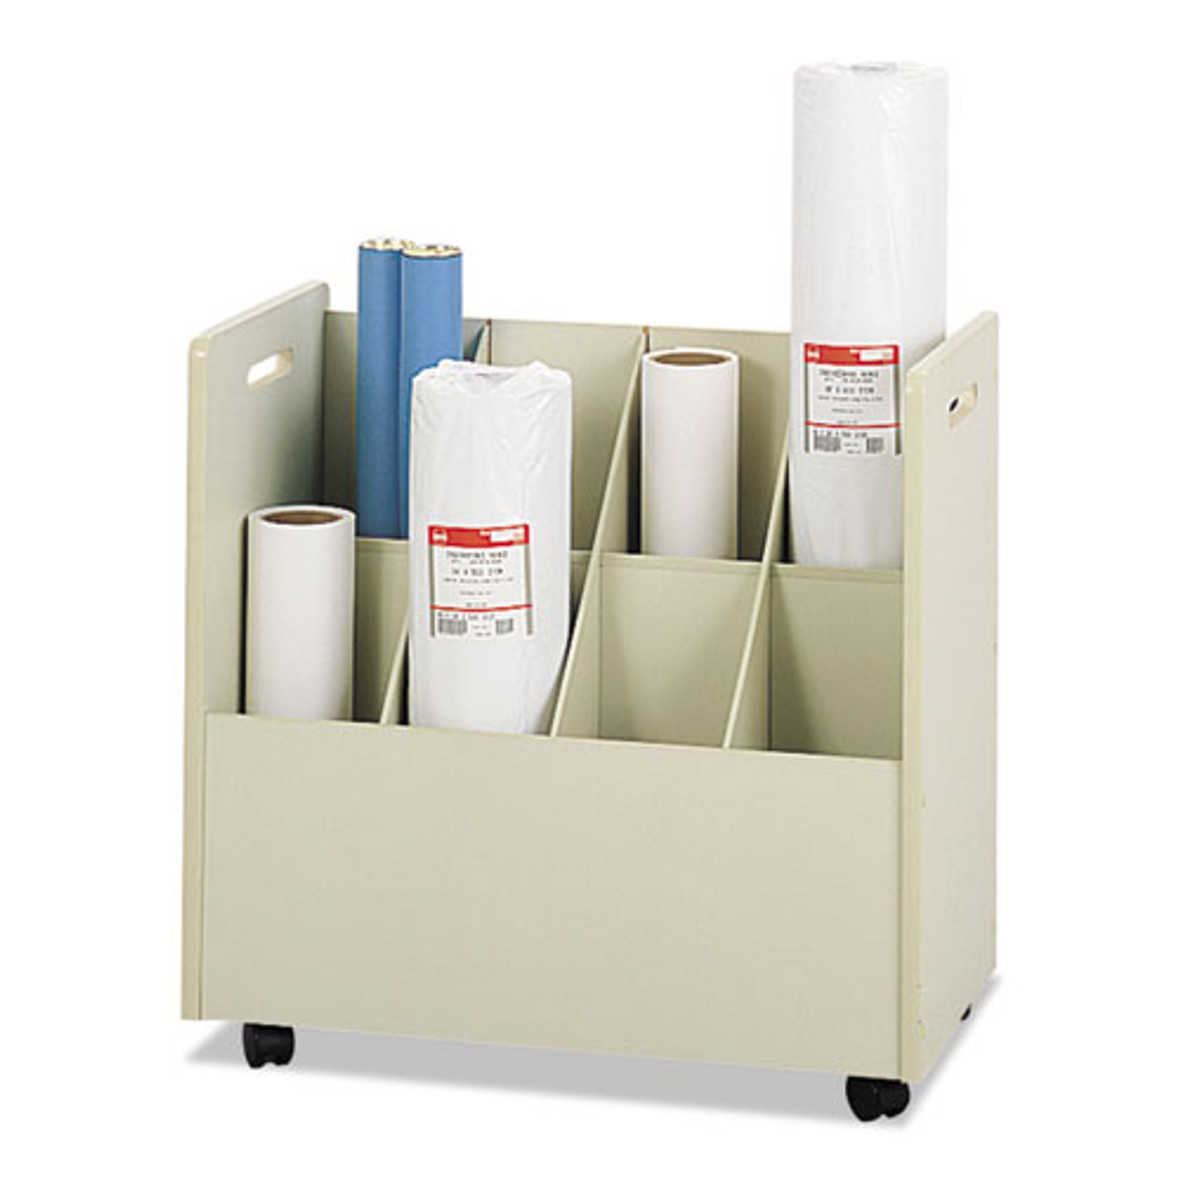 Safco® Laminate Mobile Roll Files, 8 Compartments, 30.13w x 15.75d x 29.25h, Putty (Quantity 1)